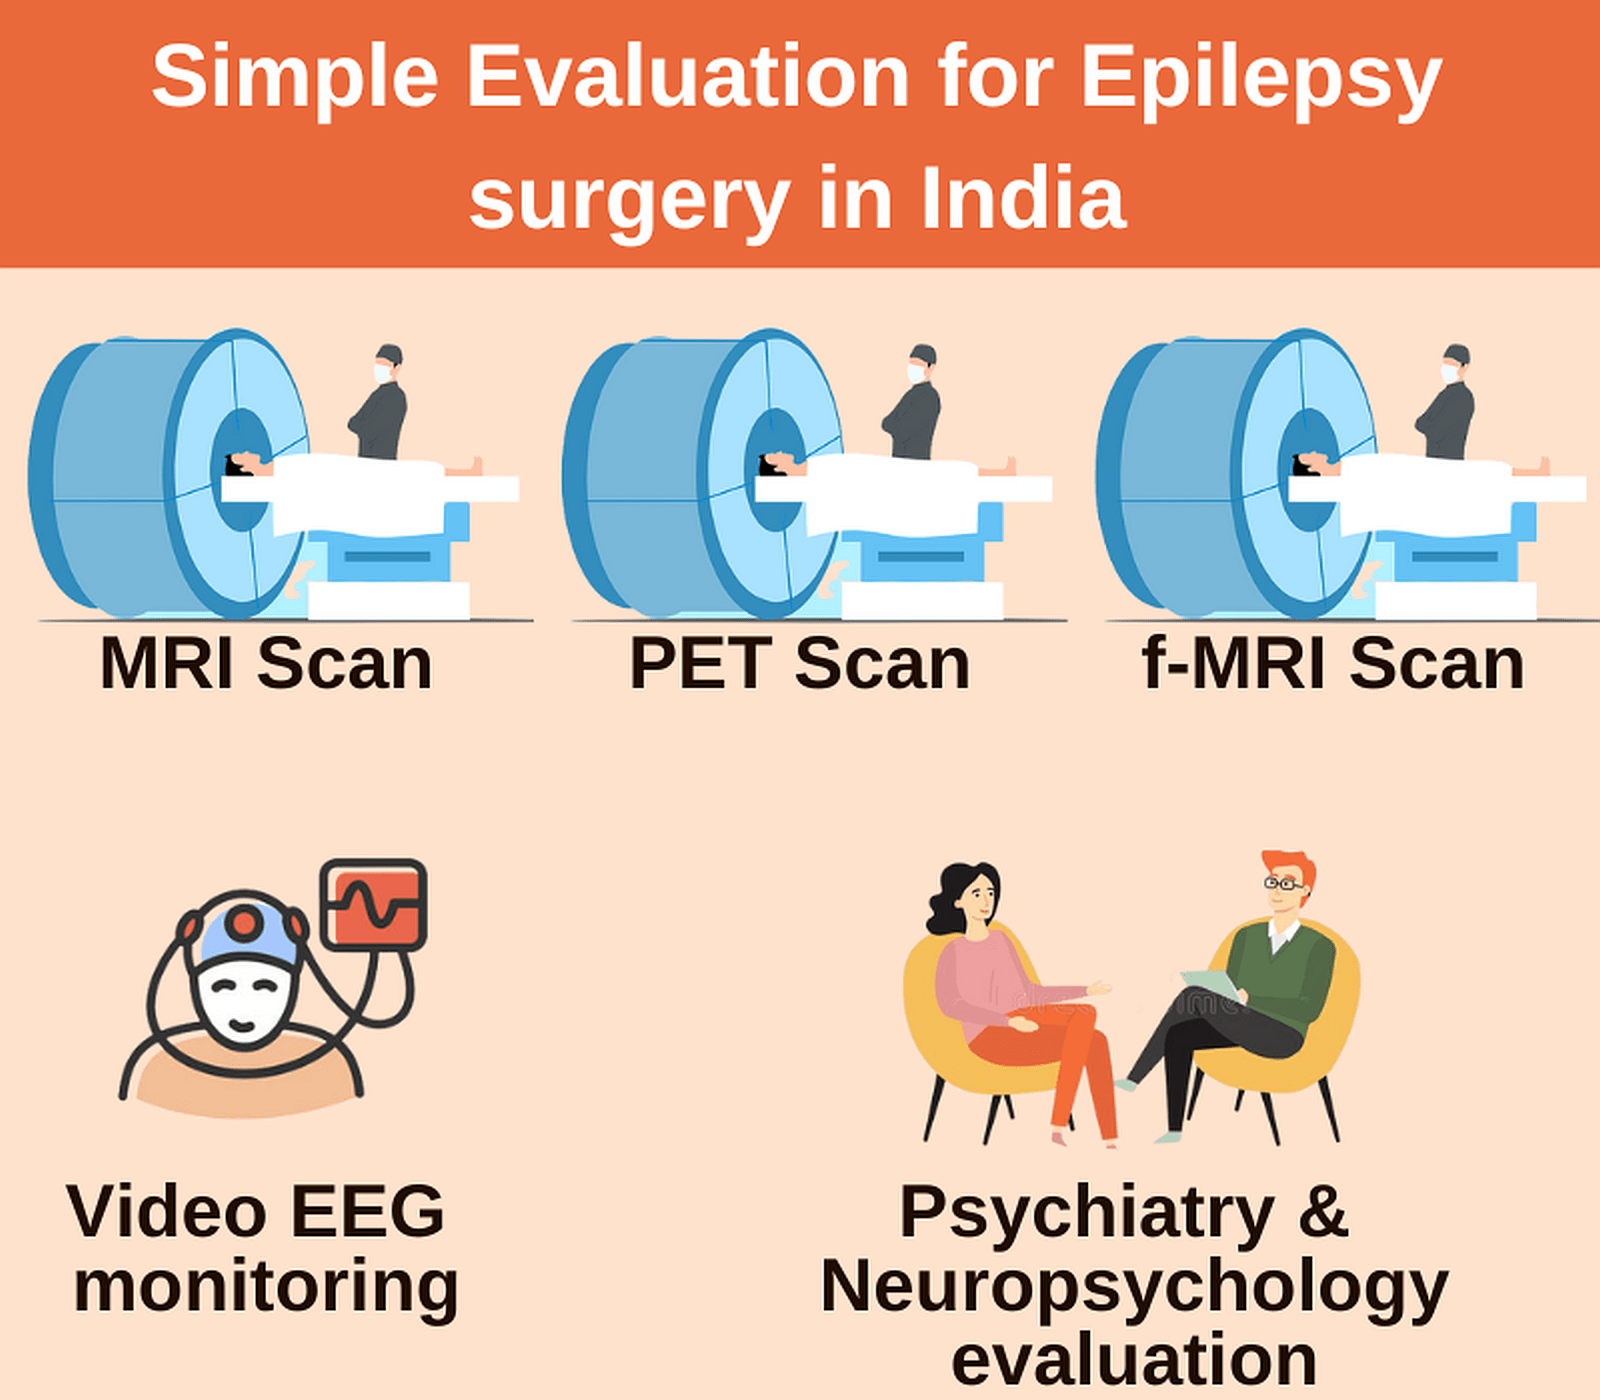 https://drkharkar.com/wp-content/uploads/Simple-evaluation-for-Epilepsy-surgery-in-India.png